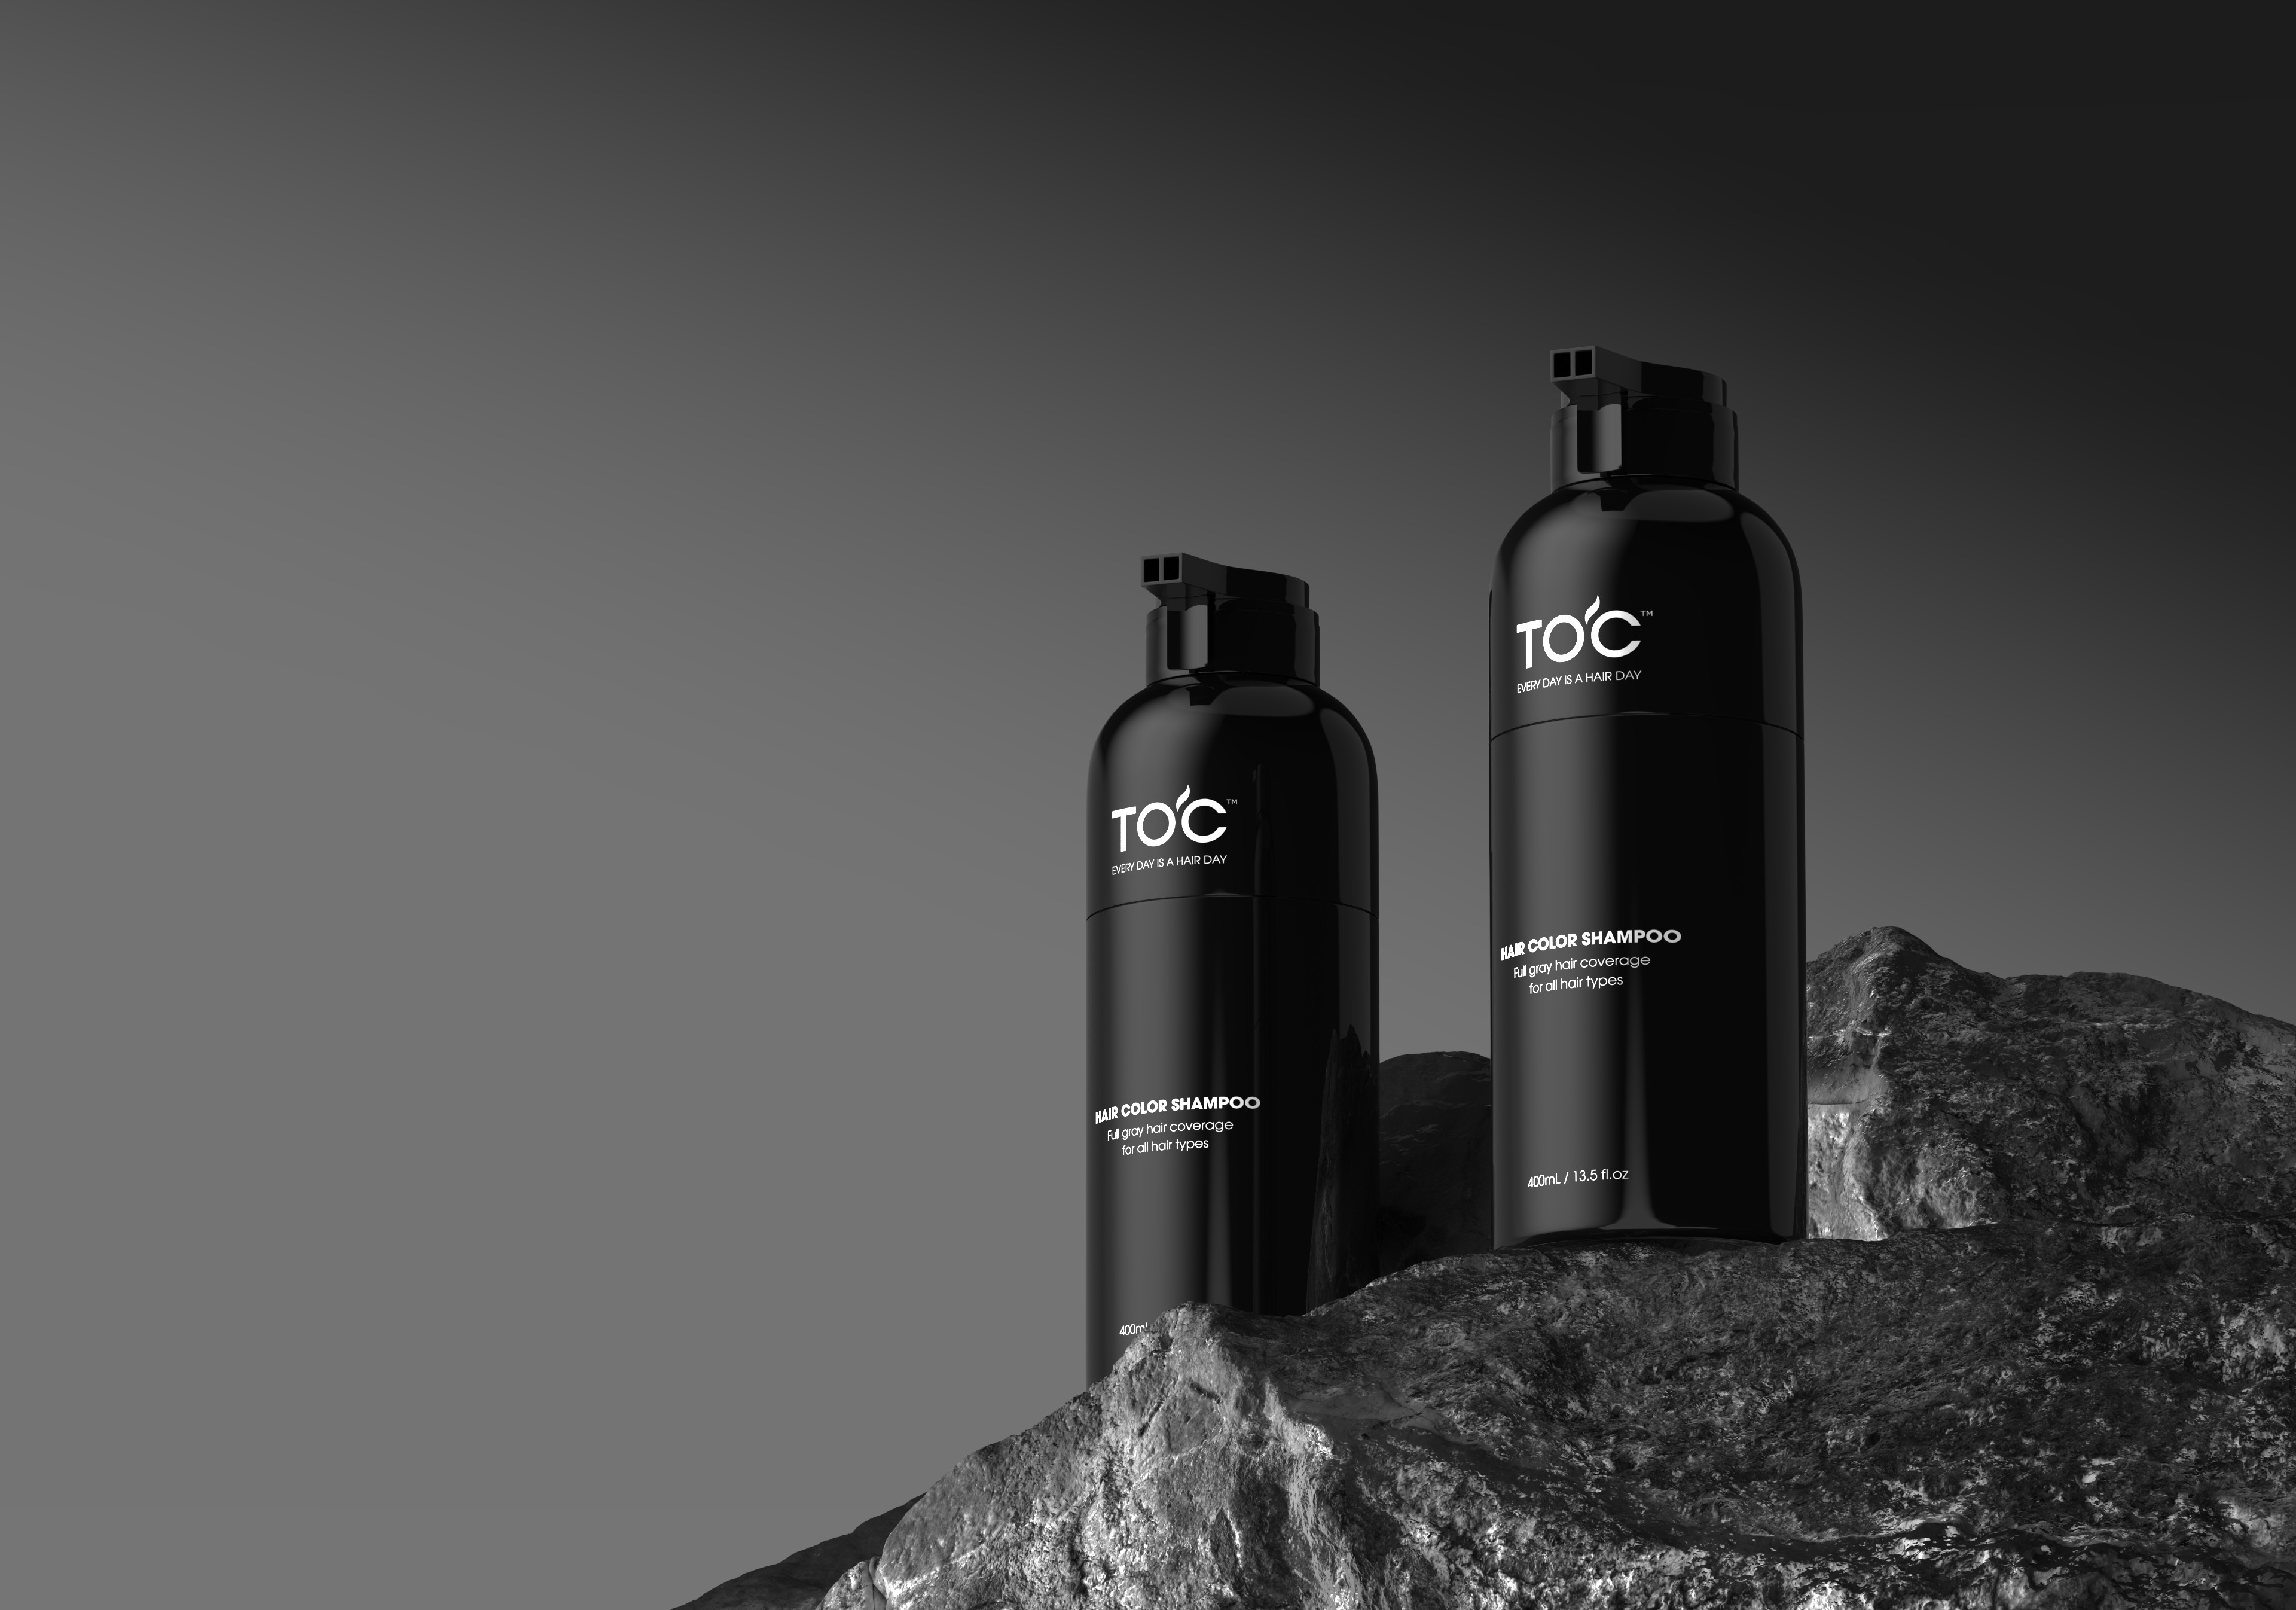 TOC Beauty Branding and Packaging Created by Alex Phan